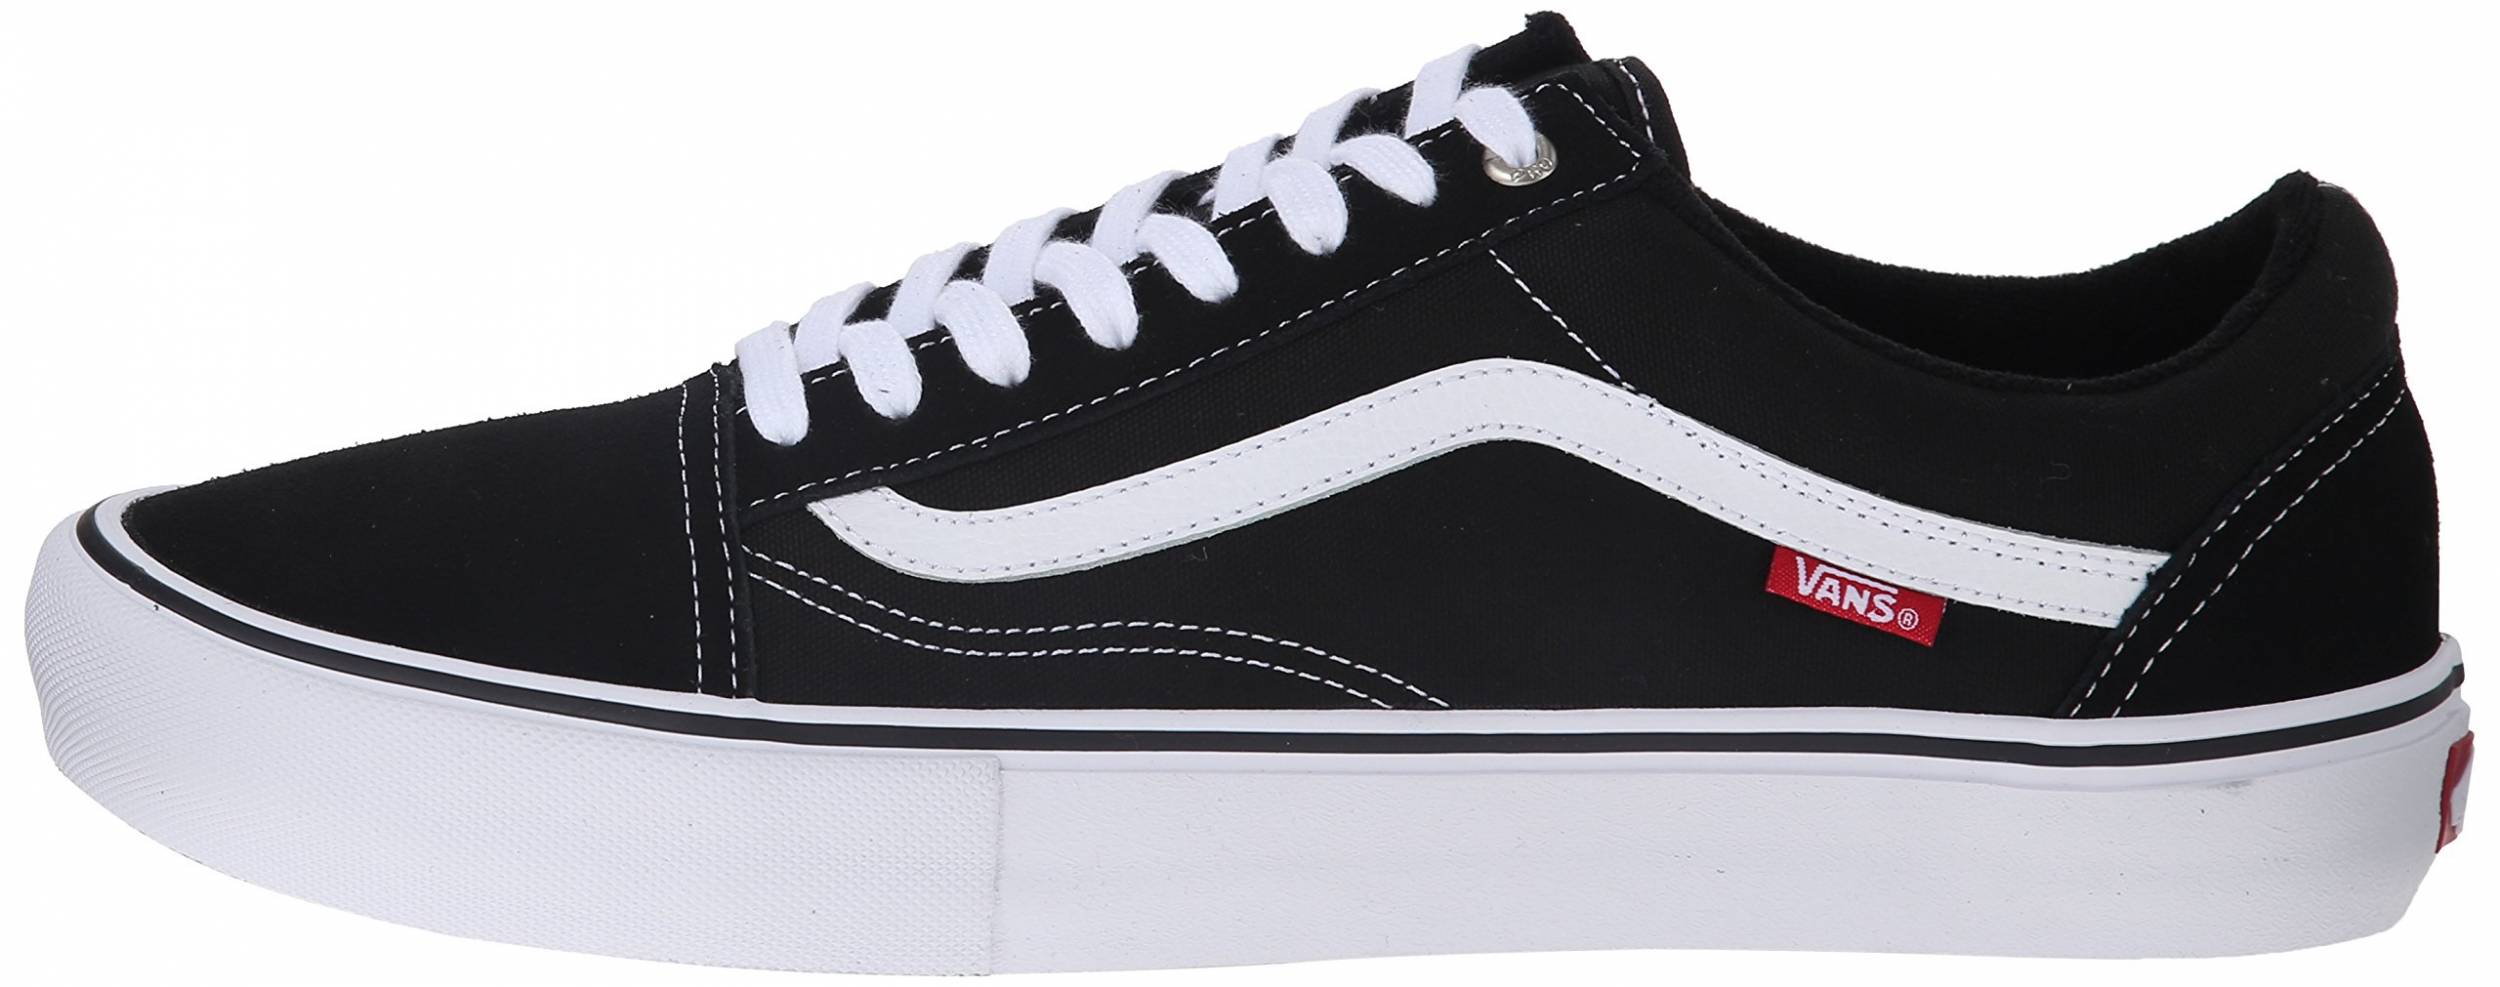 Only £45 + Review of Vans Old Skool Pro 